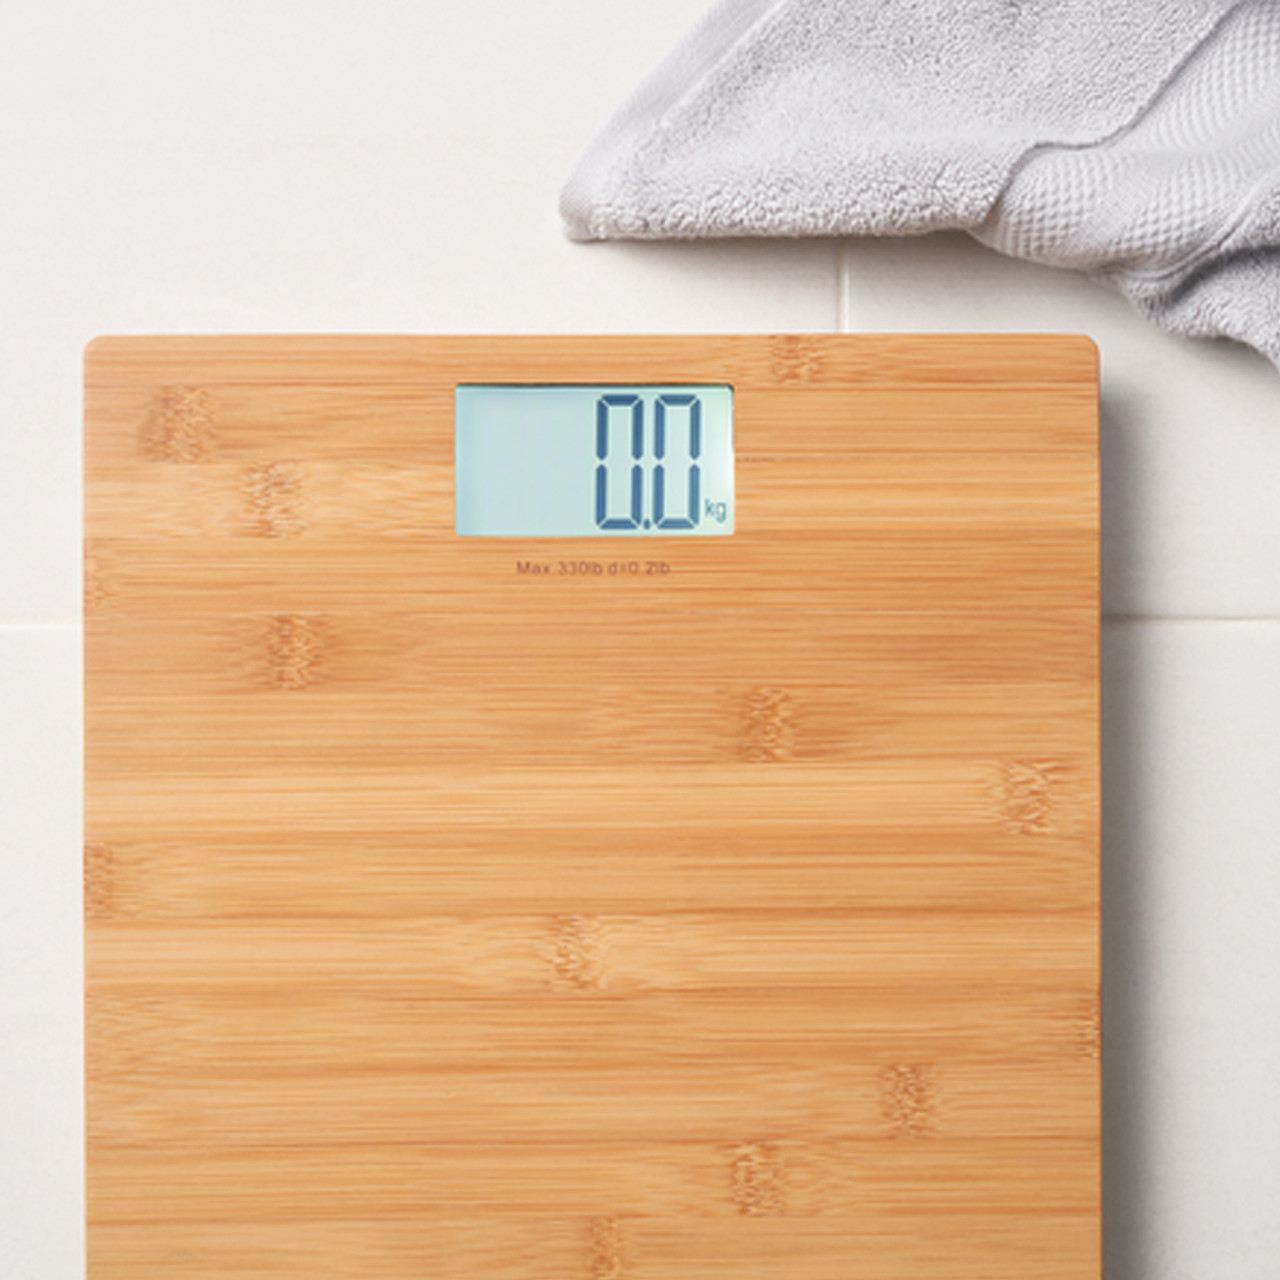 Bamboo Bathroom Scale with Backlight – ToiletTree Products